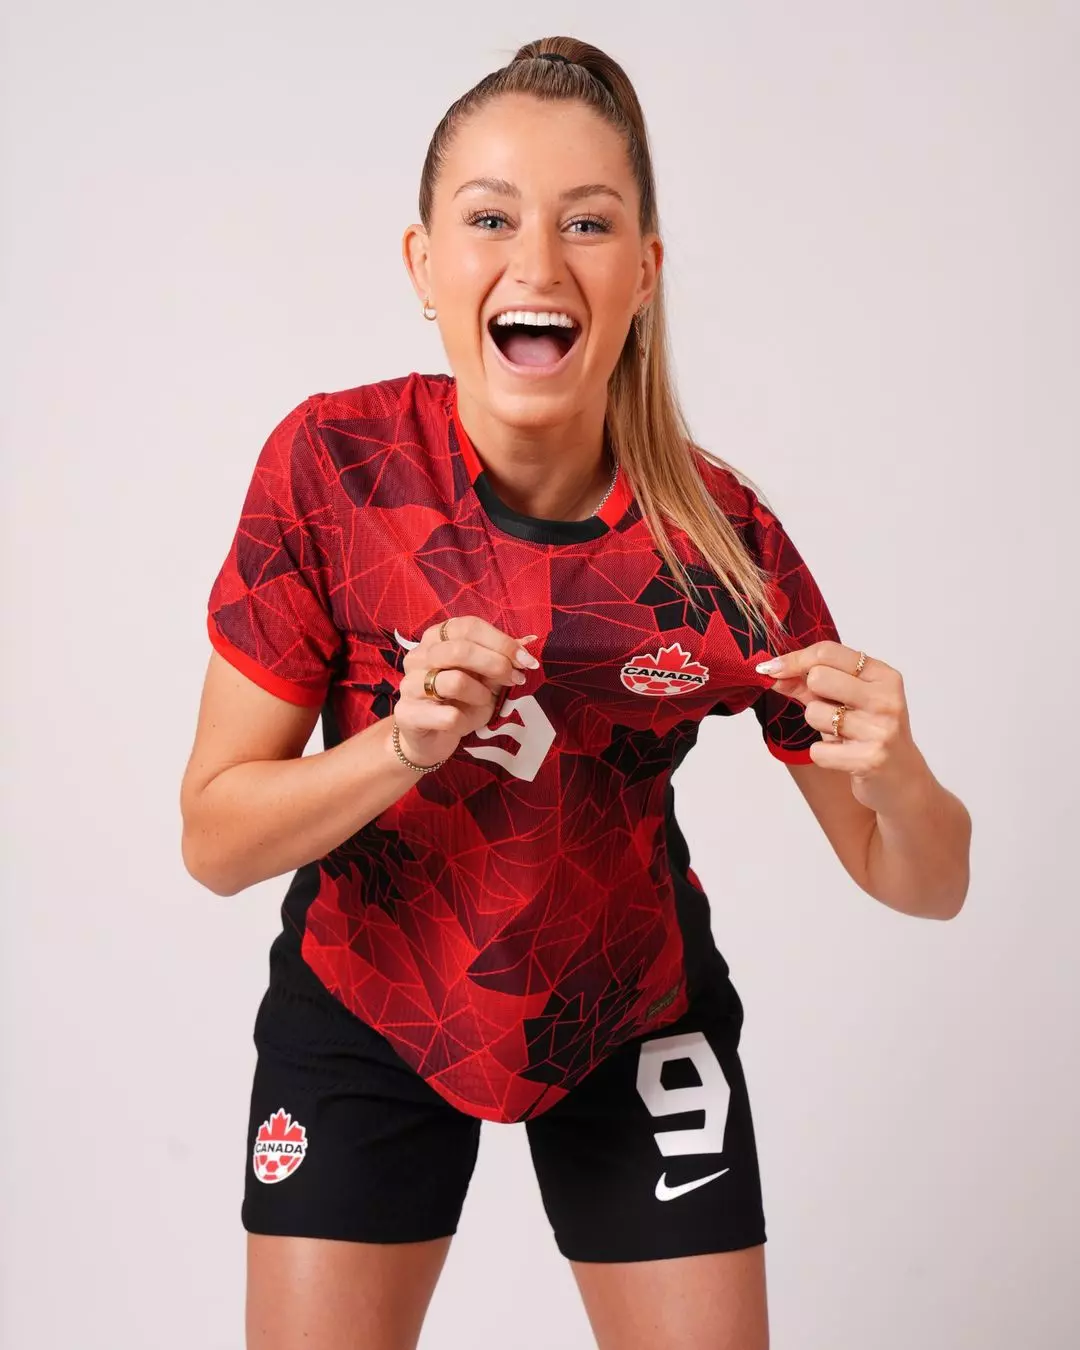 Jordyn Huitema is one of the most beautiful footballers at the FIFA Women's World Cup